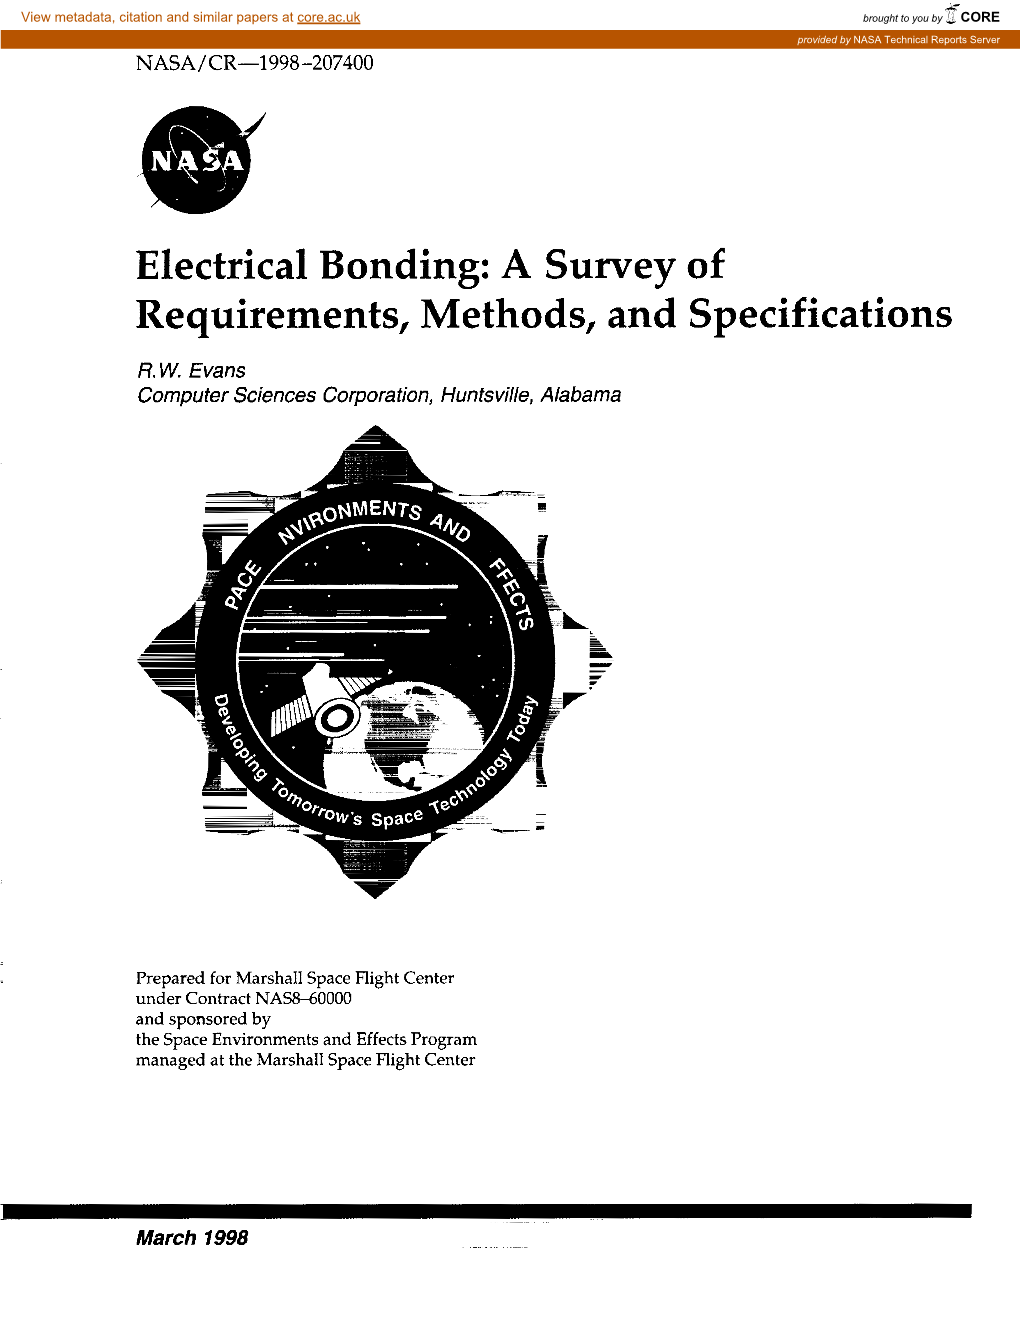 Electrical Bonding: a Survey of Requirements, Methods, and Specifications